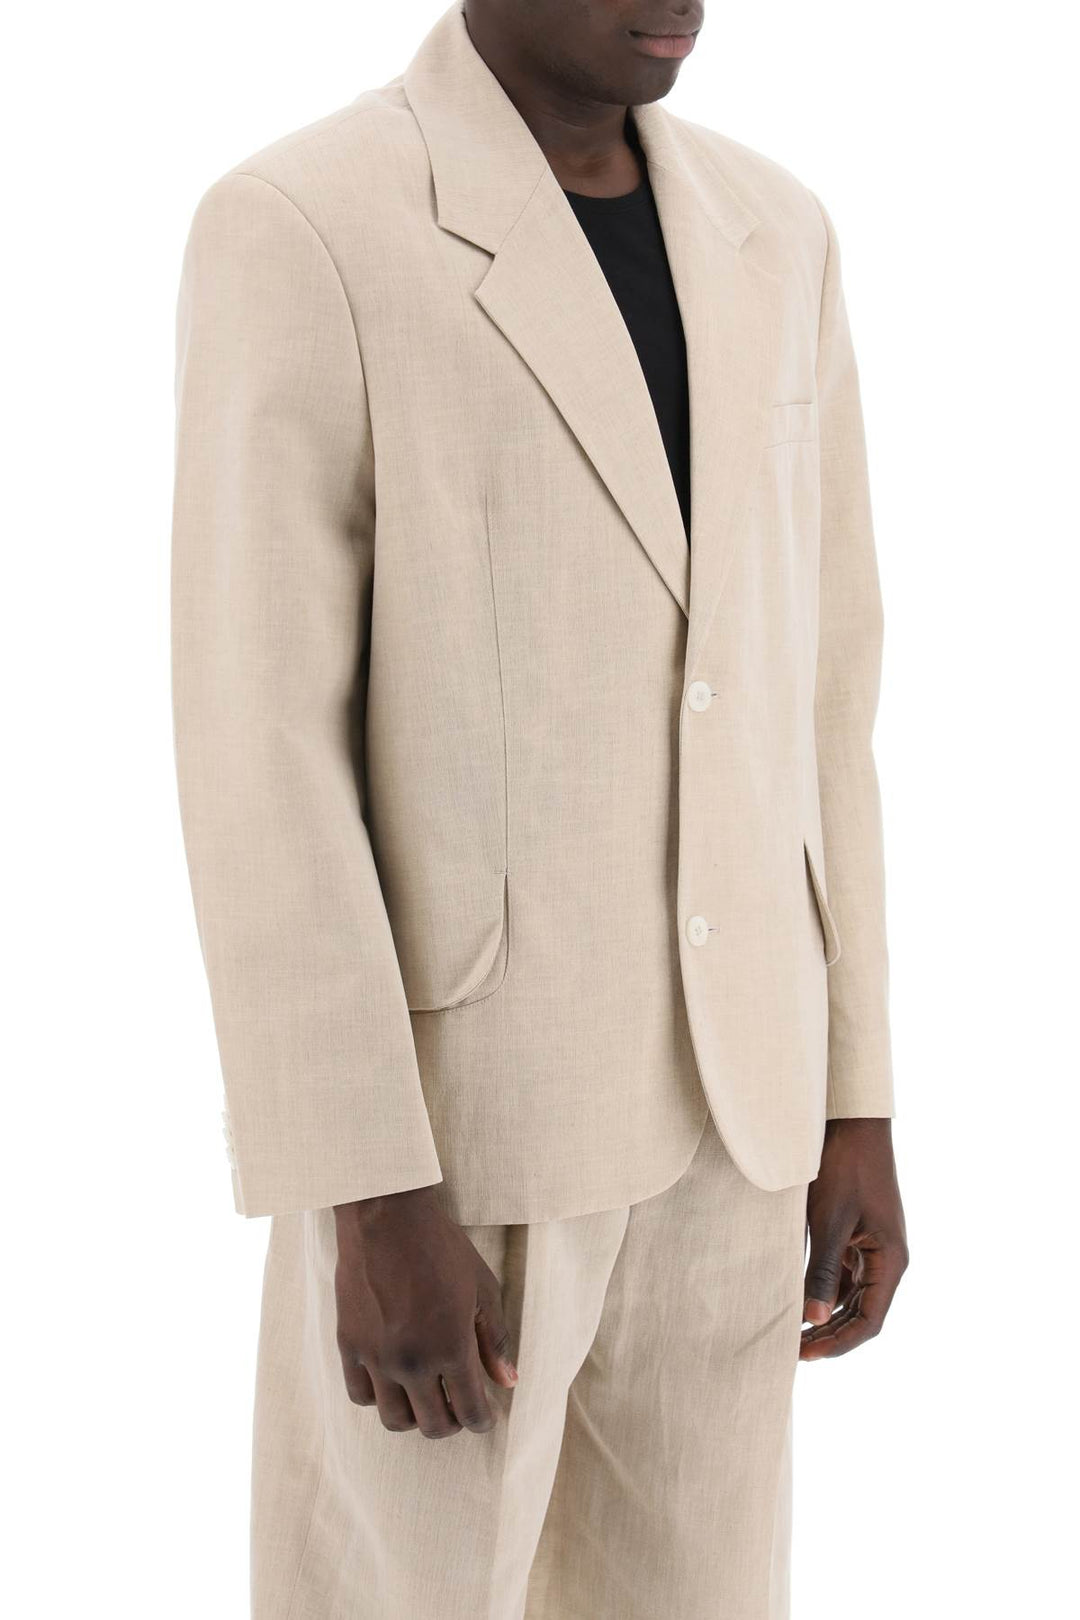 Jacquemus Replace With Double Quotesingle Breasted Jacket Titled The   Beige